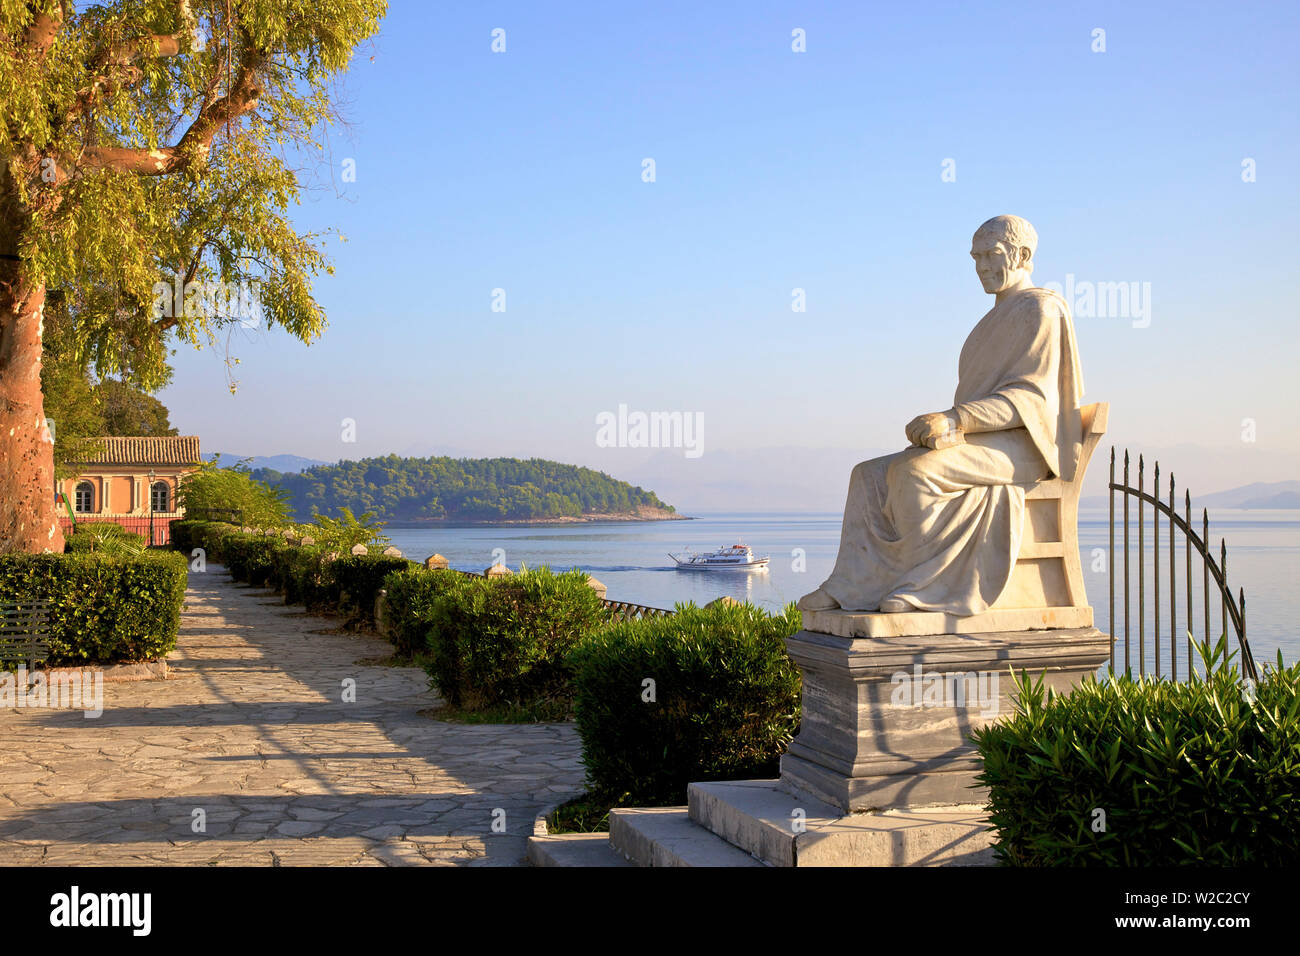 The Church Of Virgin Mary Mandrakina and Statue of Frederick North, 5th Earl of Guilford In Boschetto Garden, Corfu Old Town, Corfu, The Ionian Islands, Greek Islands, Greece, Europe Stock Photo